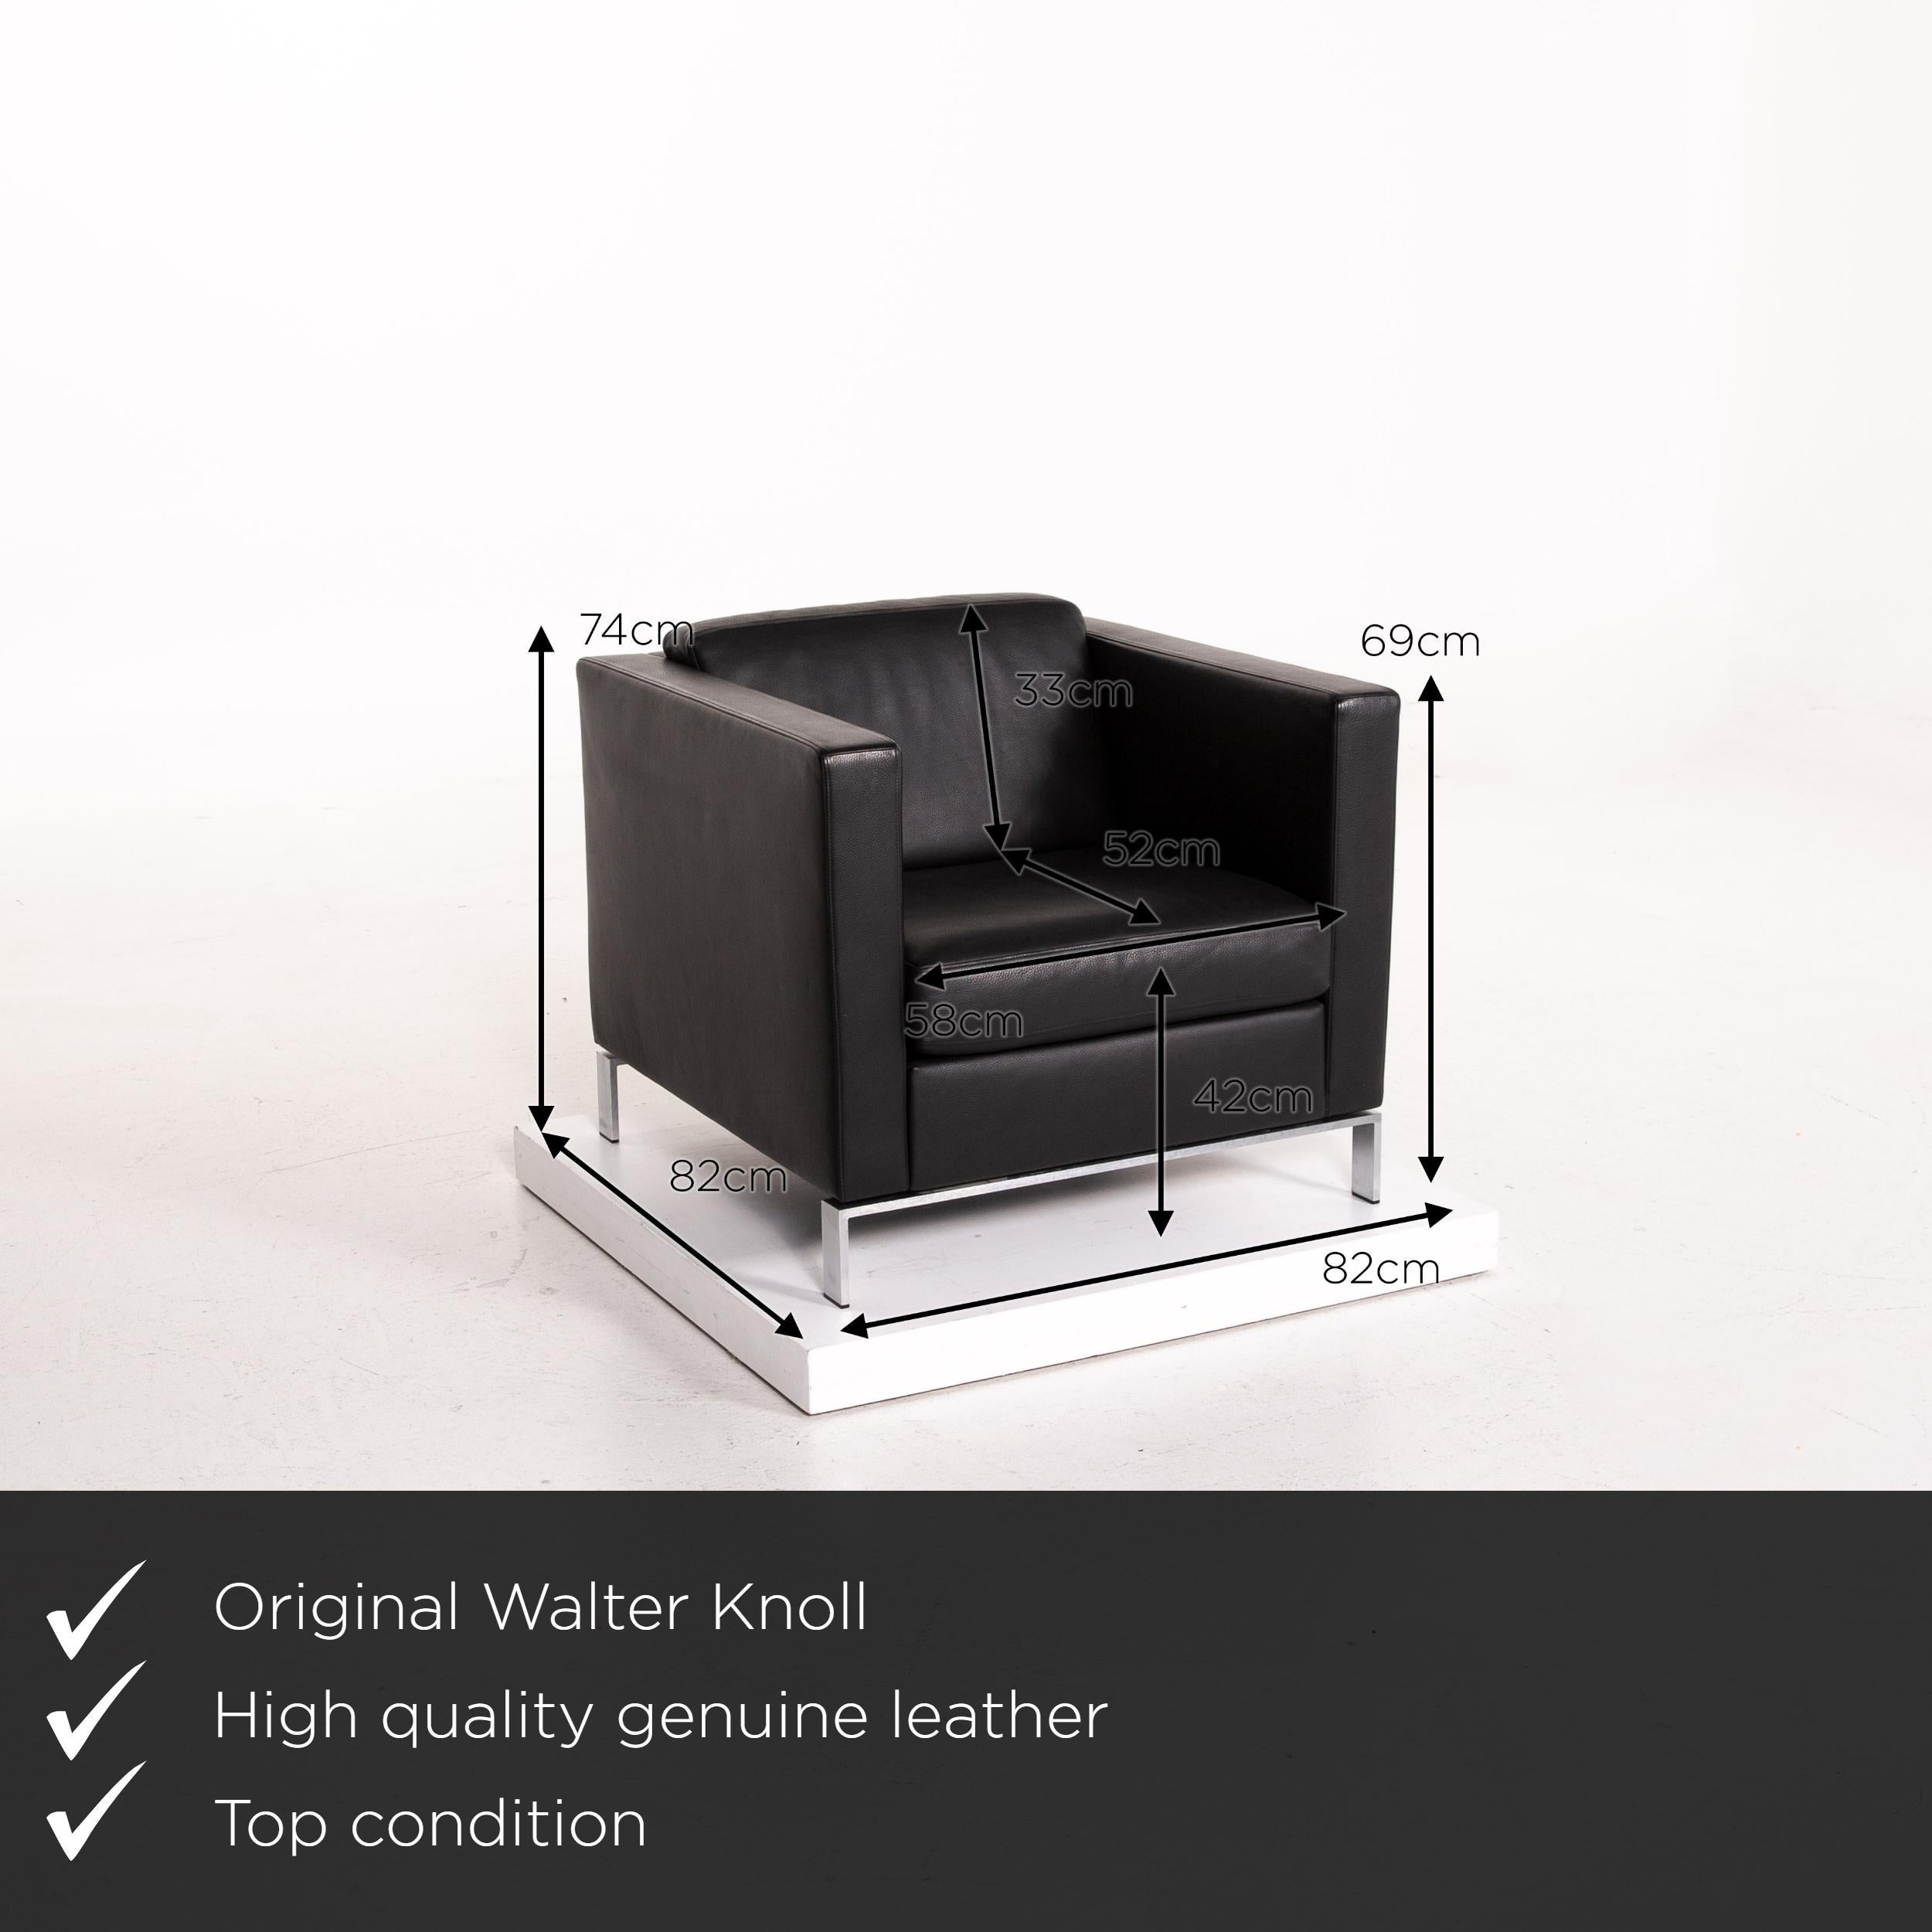 We present to you a Walter Knoll Foster 500 leather armchair set black 2x armchairs.
 

 Product measurements in centimeters:
 

Depth 82
Width 82
Height 74
Seat height 42
Rest height 69
Seat depth 52
Seat width 58
Back height 33.
 